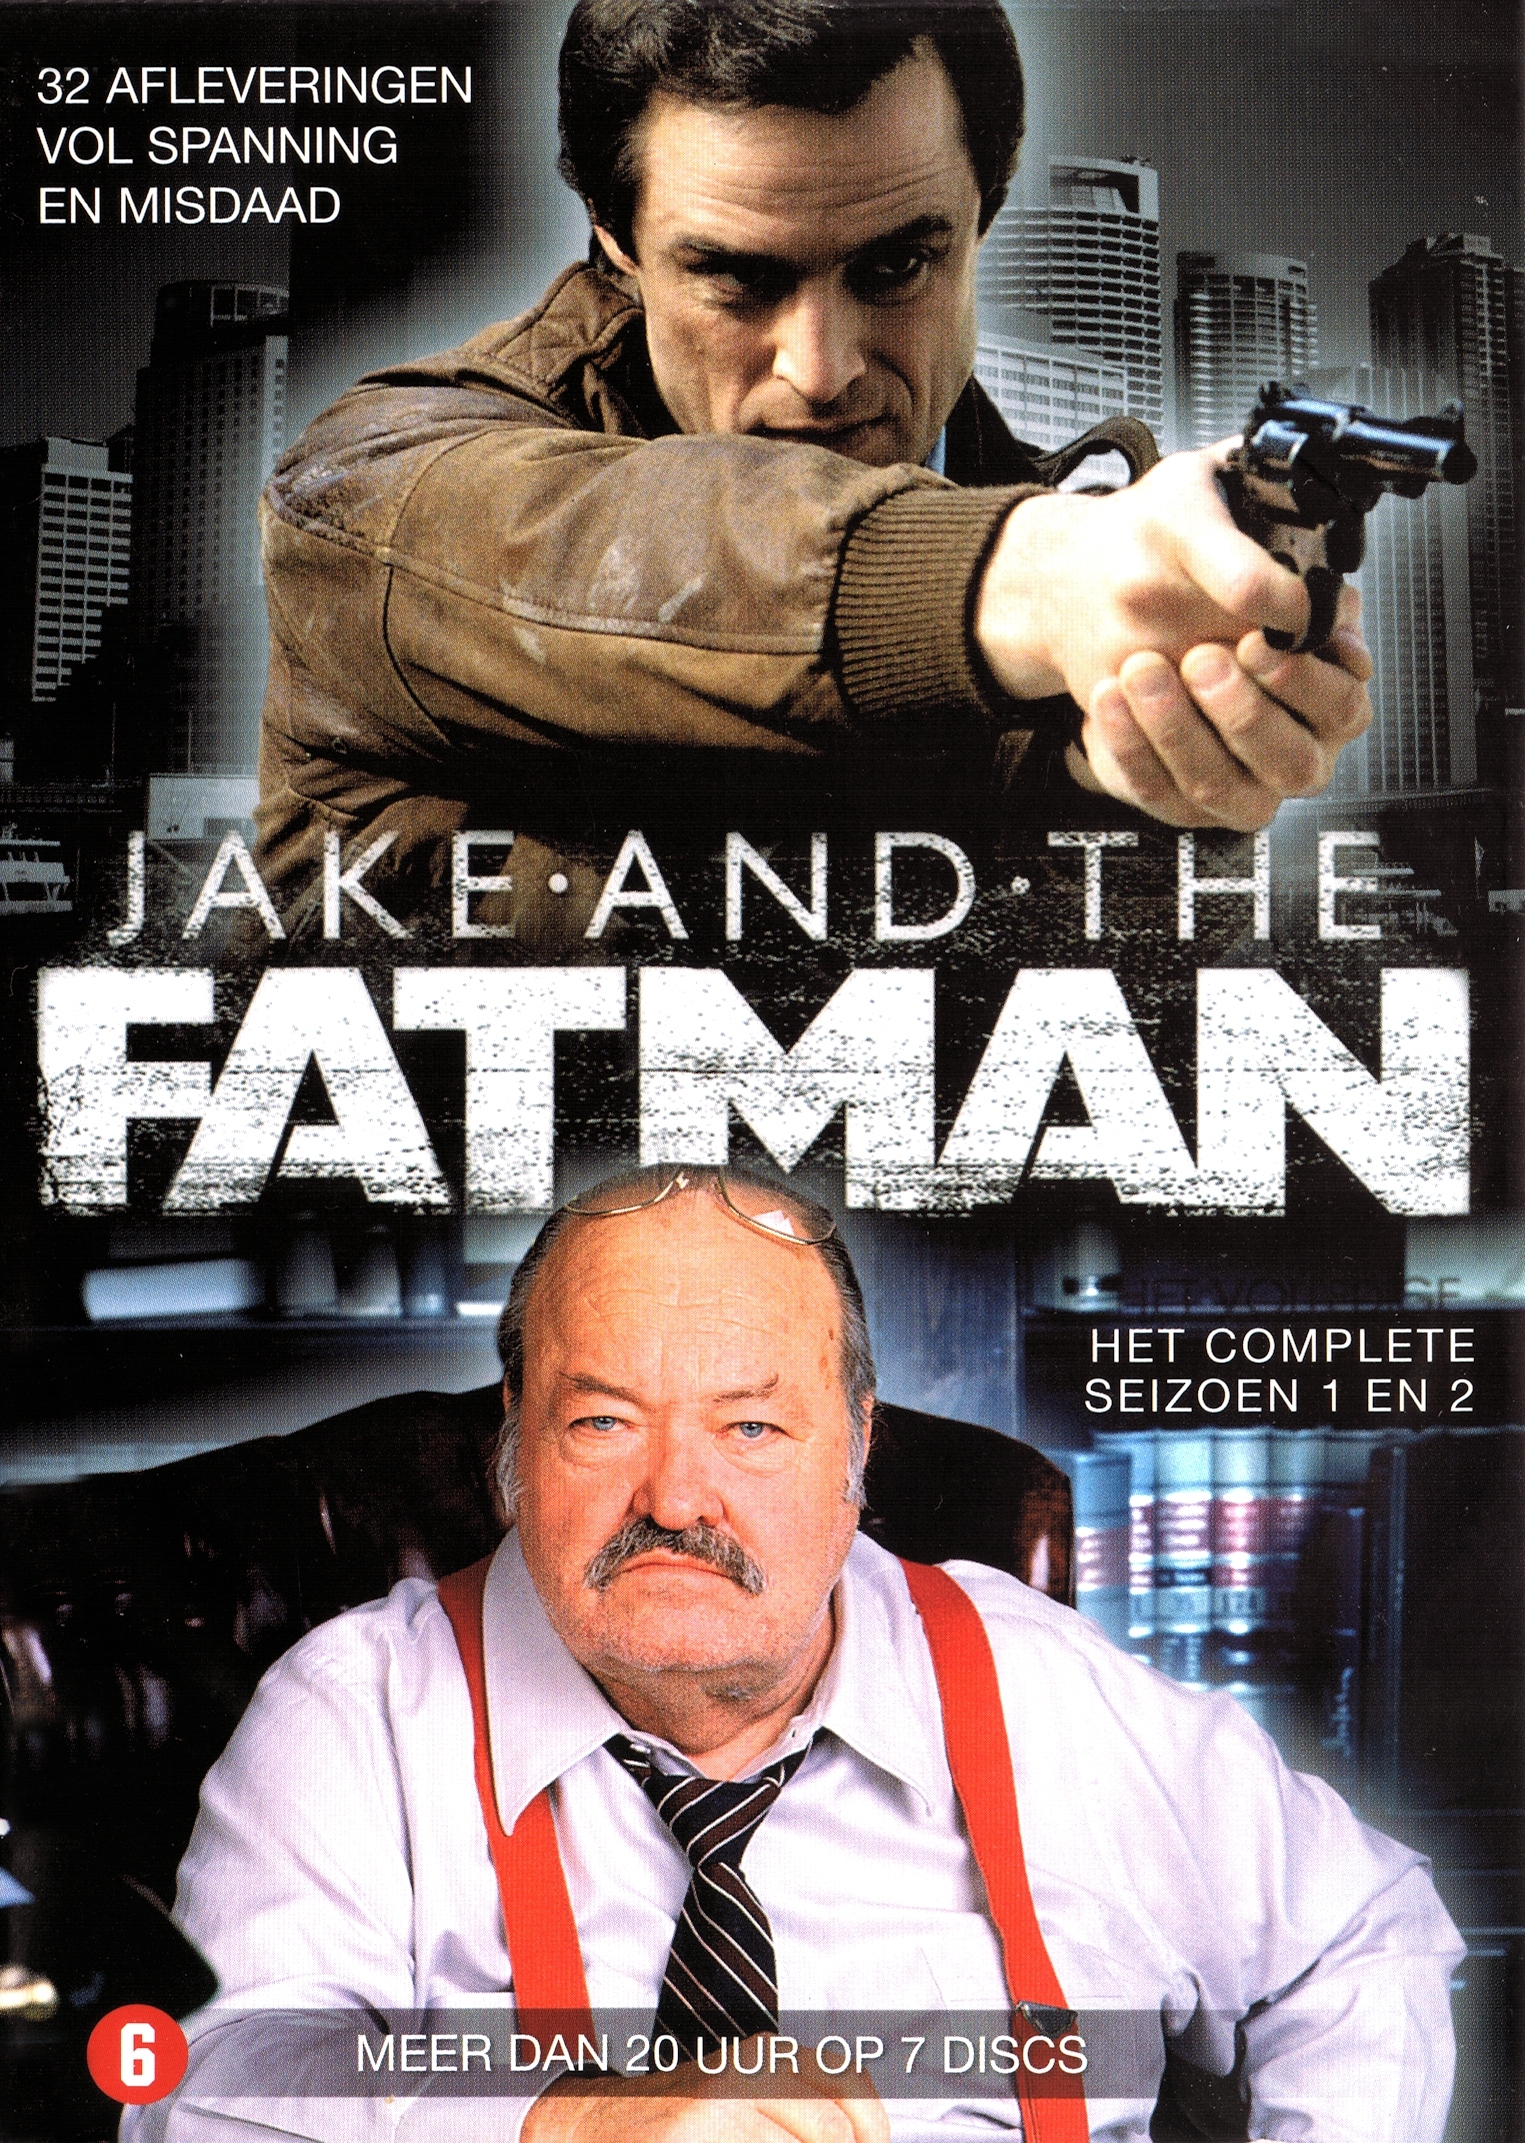 Jake and the Fatman: Complete Series 1 and 2 DVD (Netherlands)